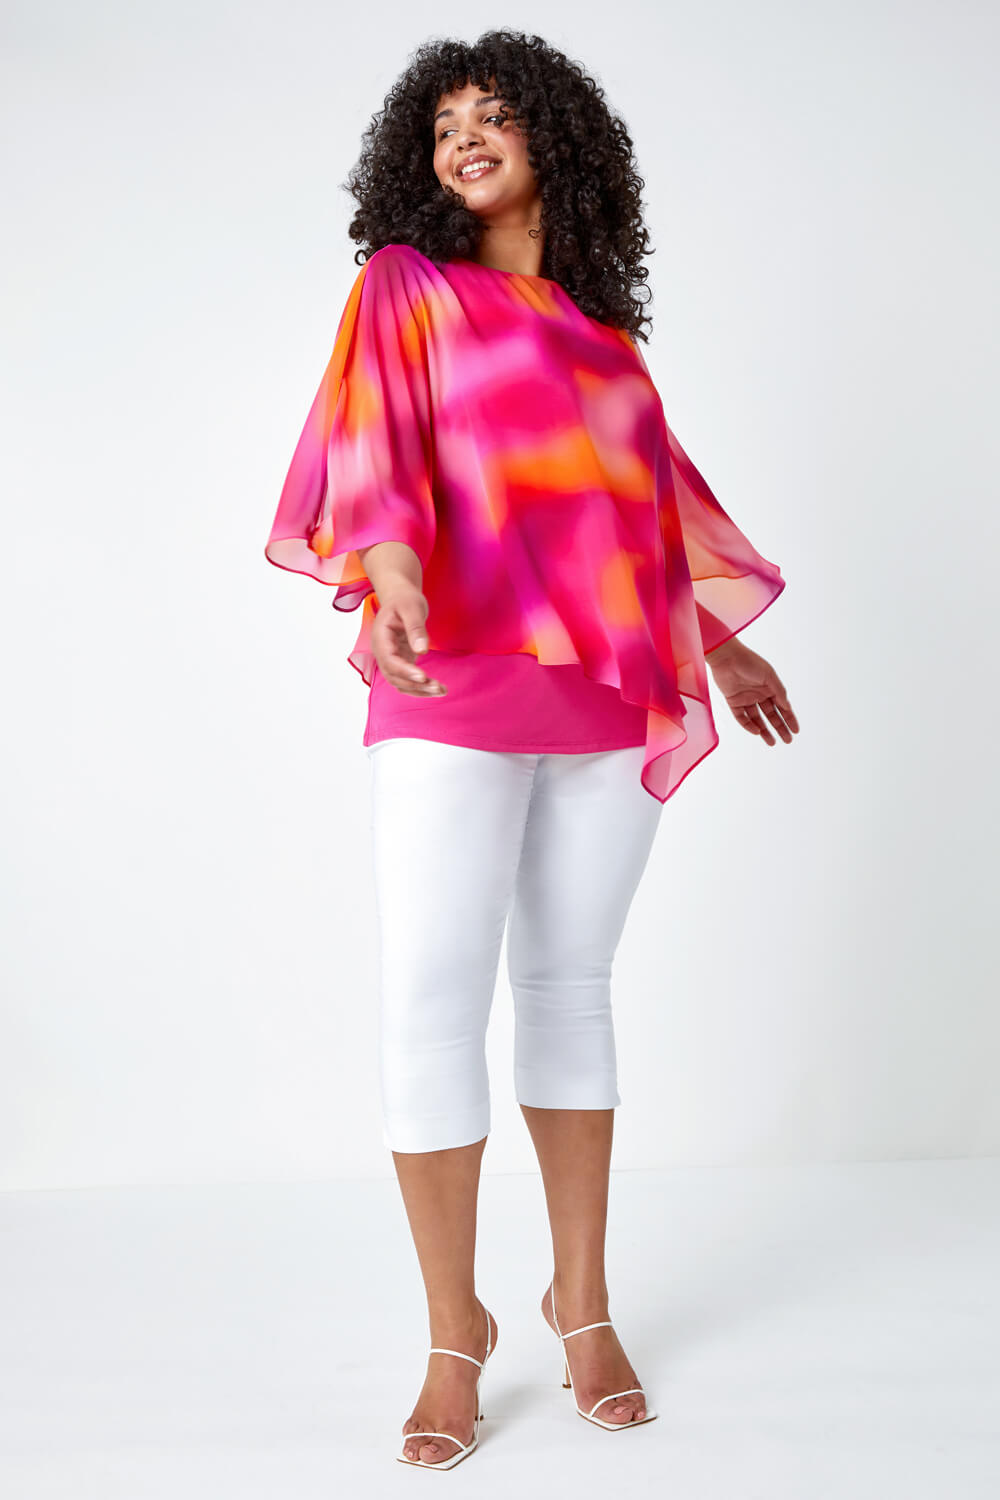 PINK Curve Ombre Print Chiffon Overlay Top, Image 2 of 5